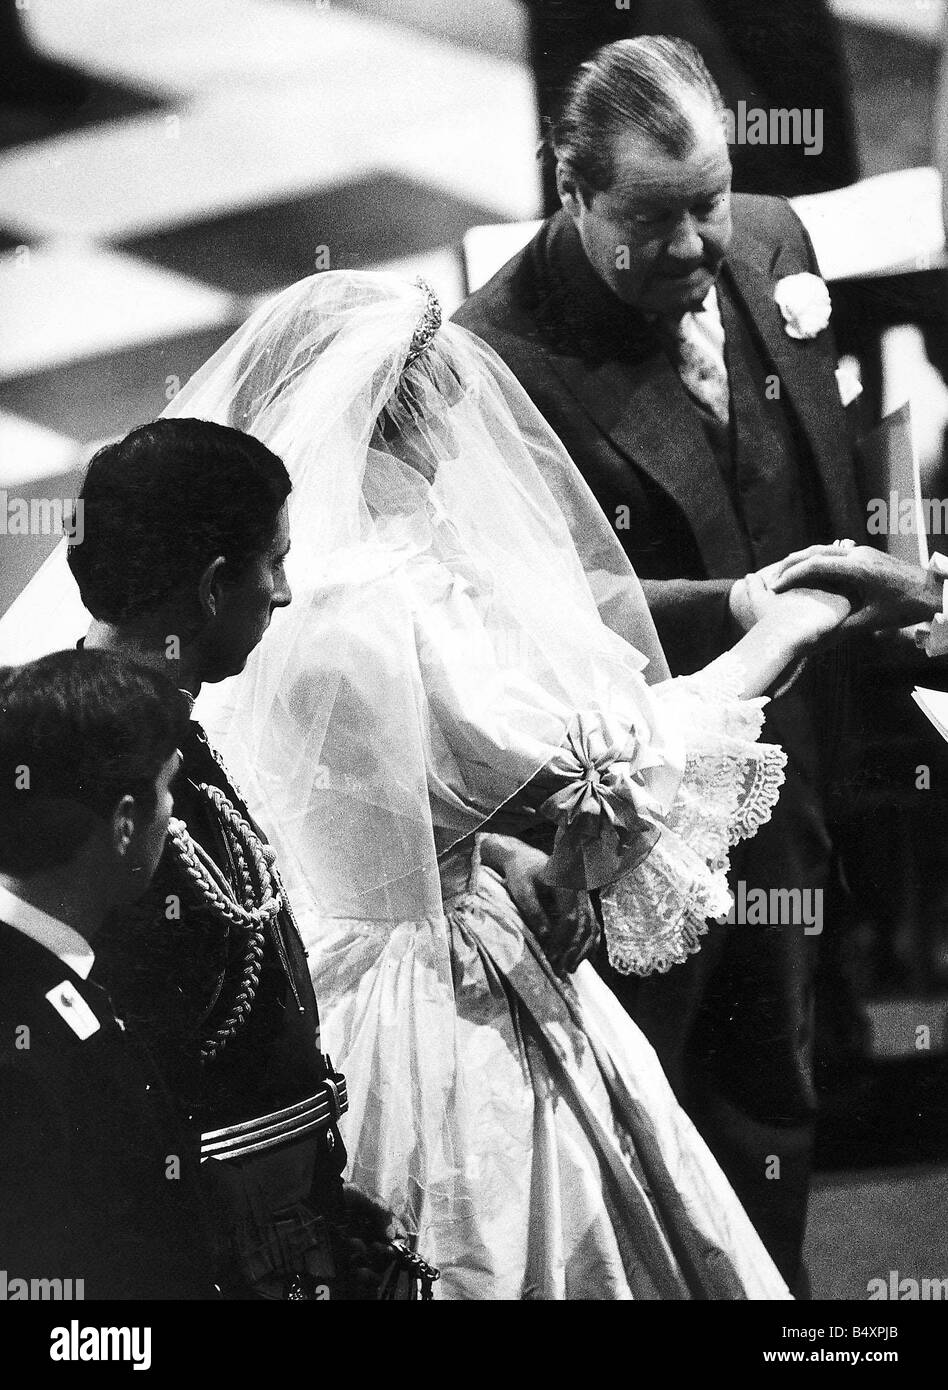 Prince Charles and Princess Diana exchange their wedding vows at St Pauls Cathedral in London The Earl Spencer passes his daughters hand over to prince Charles in the wedding ceremony watched over by Prince Andrew Stock Photo